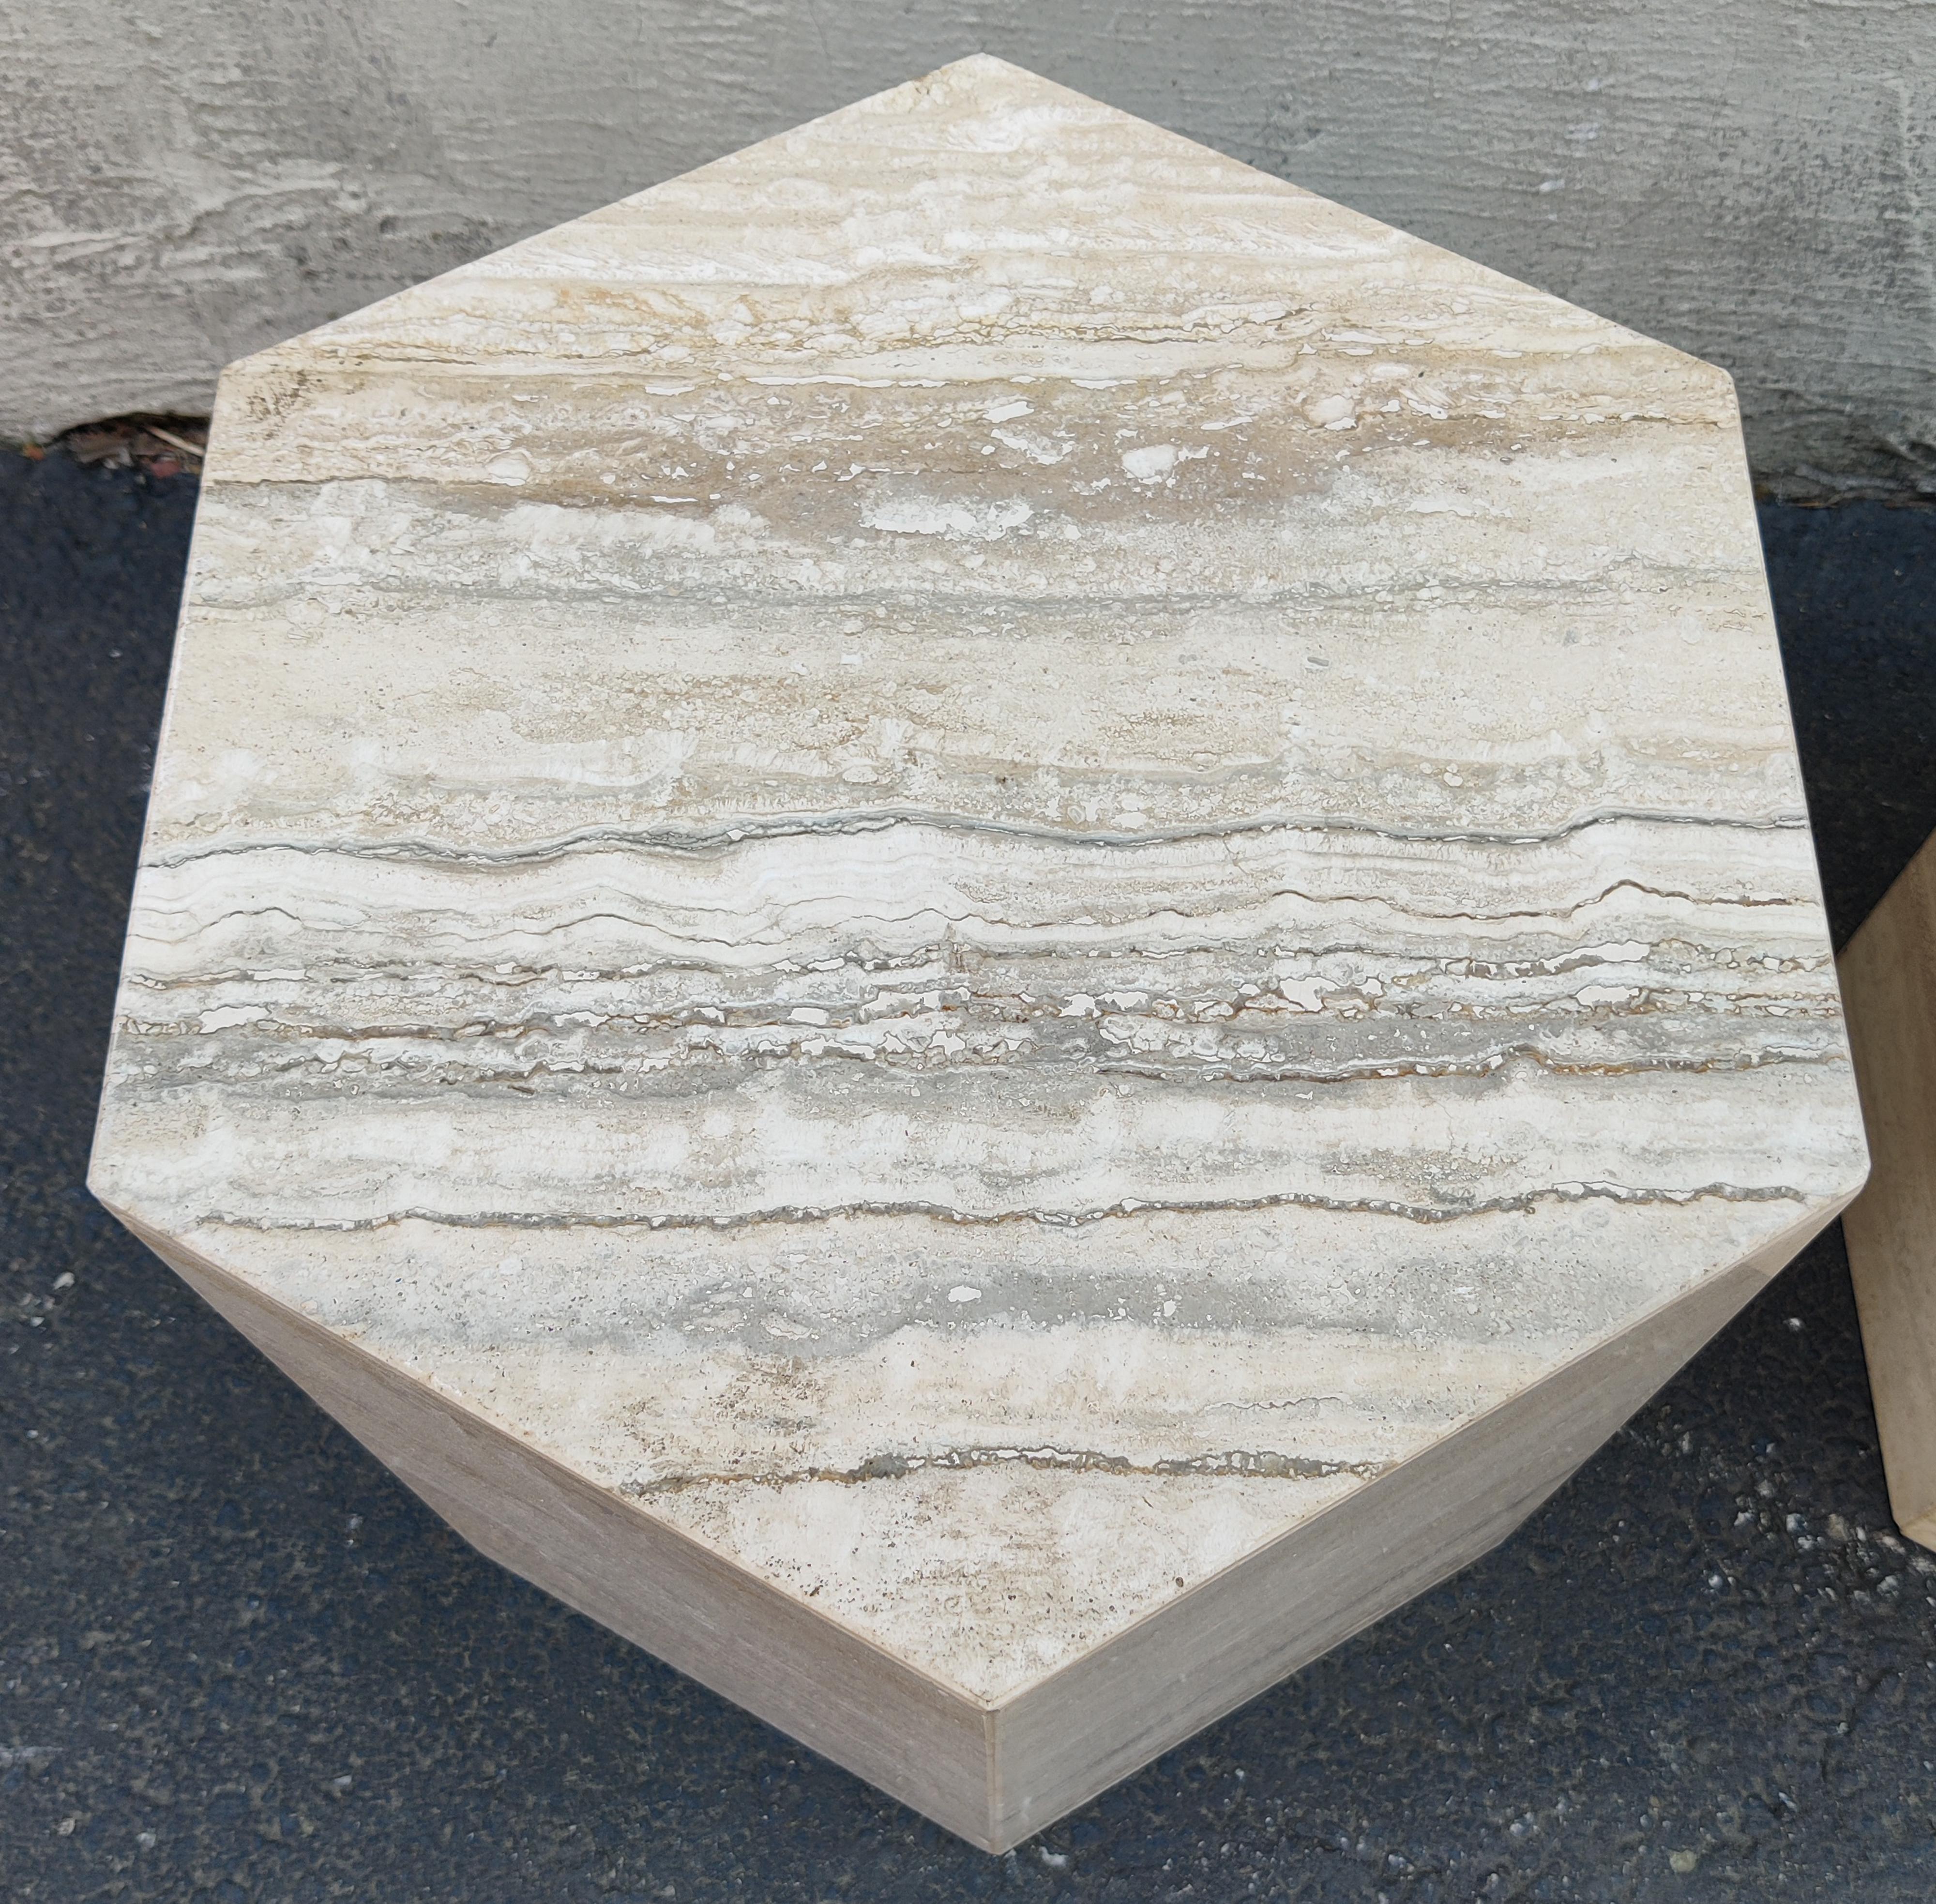 Pair Matching Post-Modern Italian Travertine Marble Hexagonal Side Tables, 1970s For Sale 2